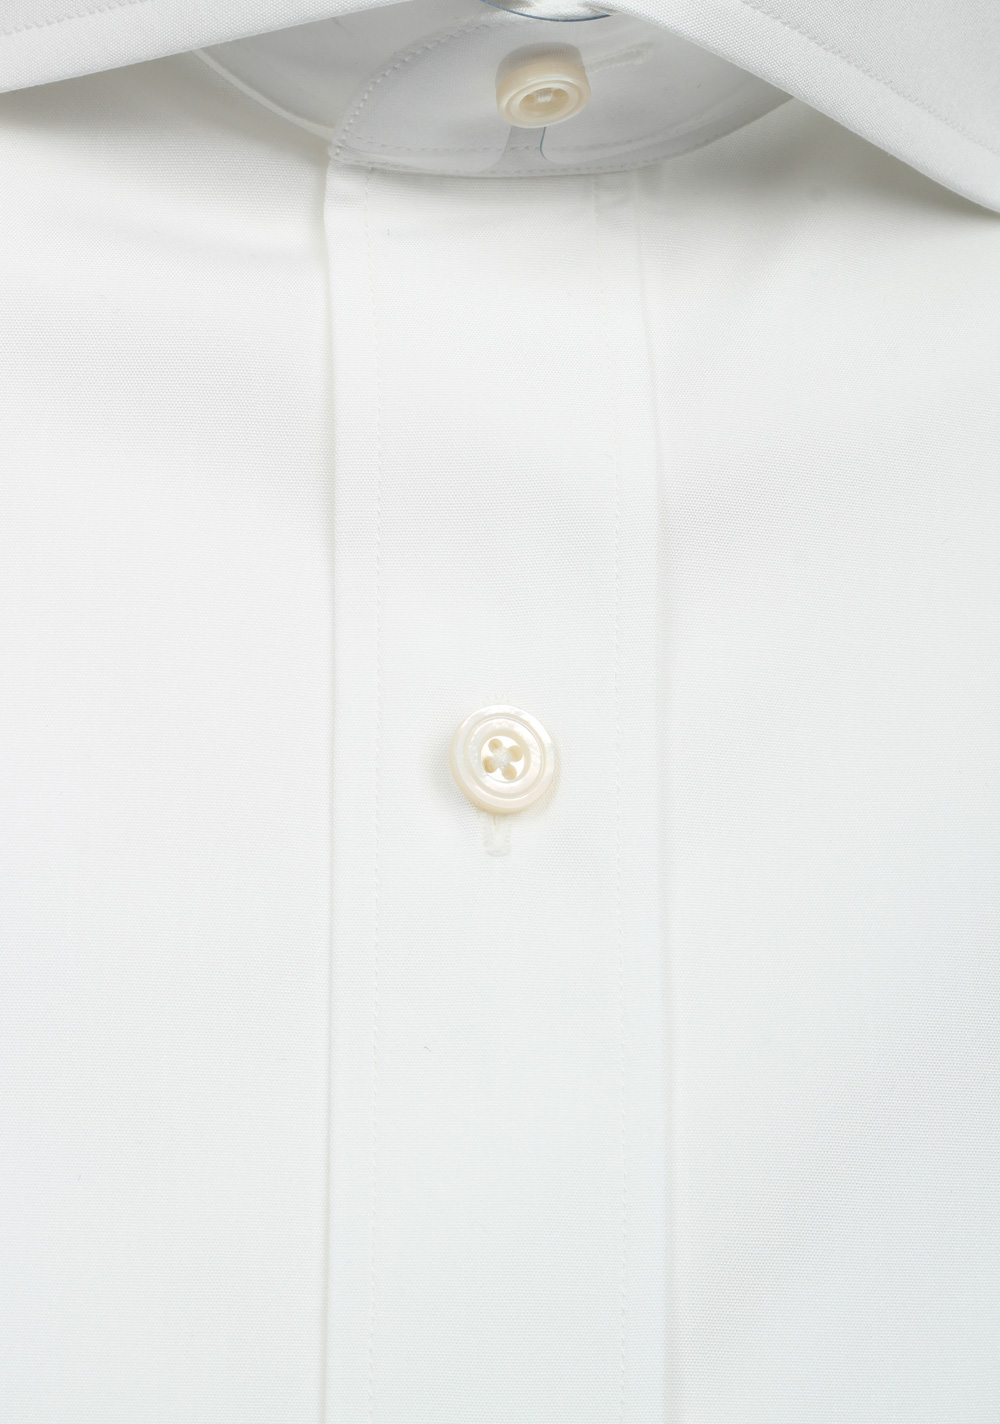 TOM FORD Solid White Dress Shirt Size 43 / 17 U.S. | Costume Limité